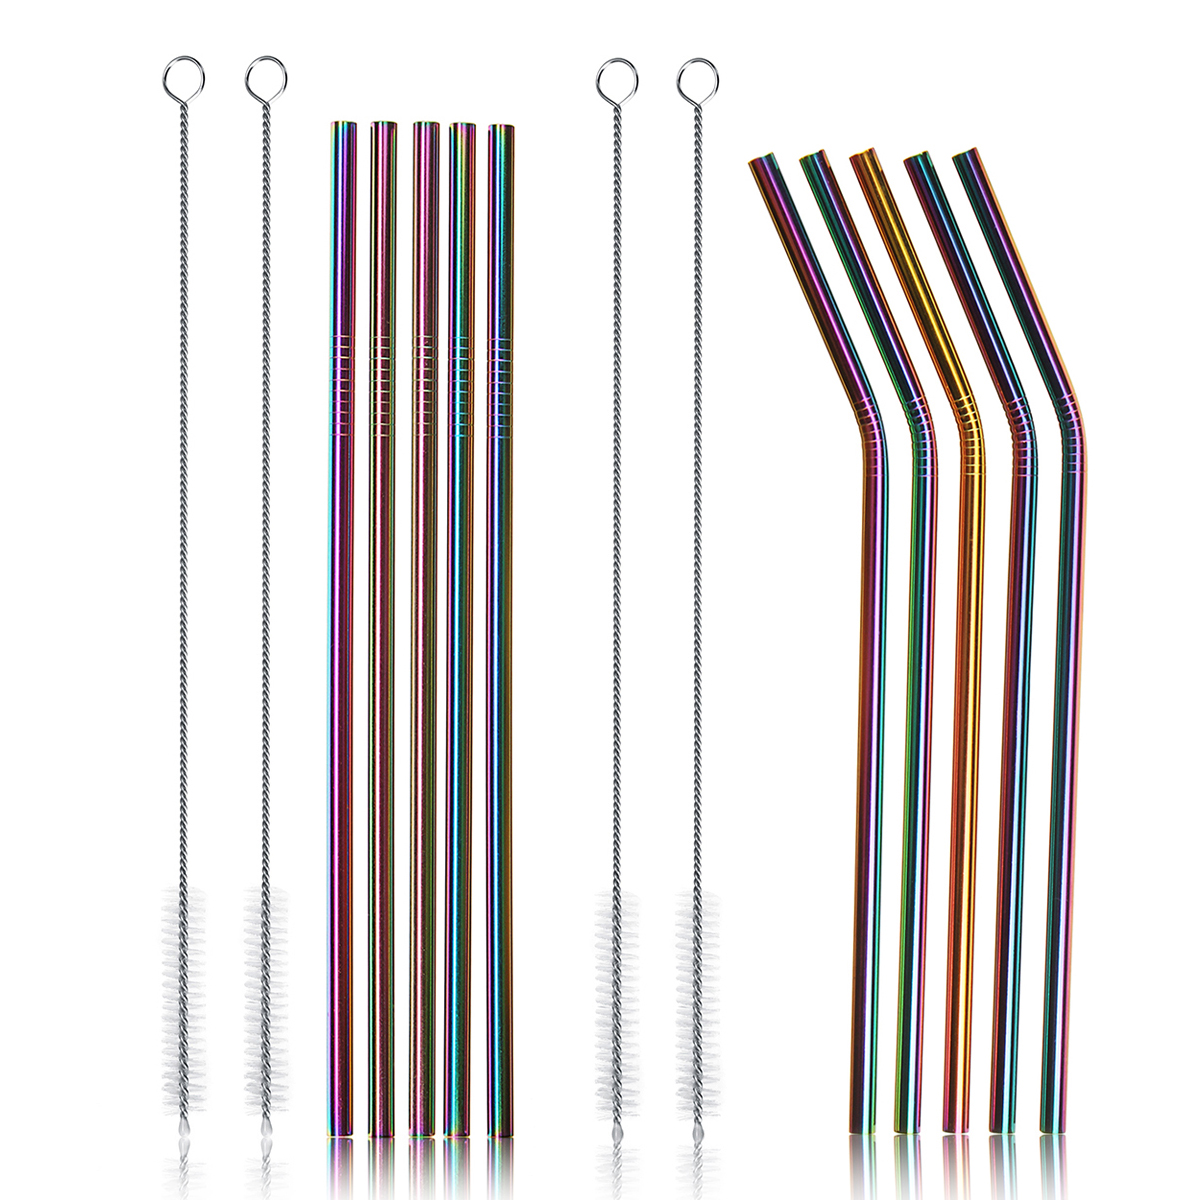 7PCS-Premium-Stainless-Steel-Metal-Drinking-Straw-Reusable-Straws-Set-With-Cleaner-Brushes-1347731-3